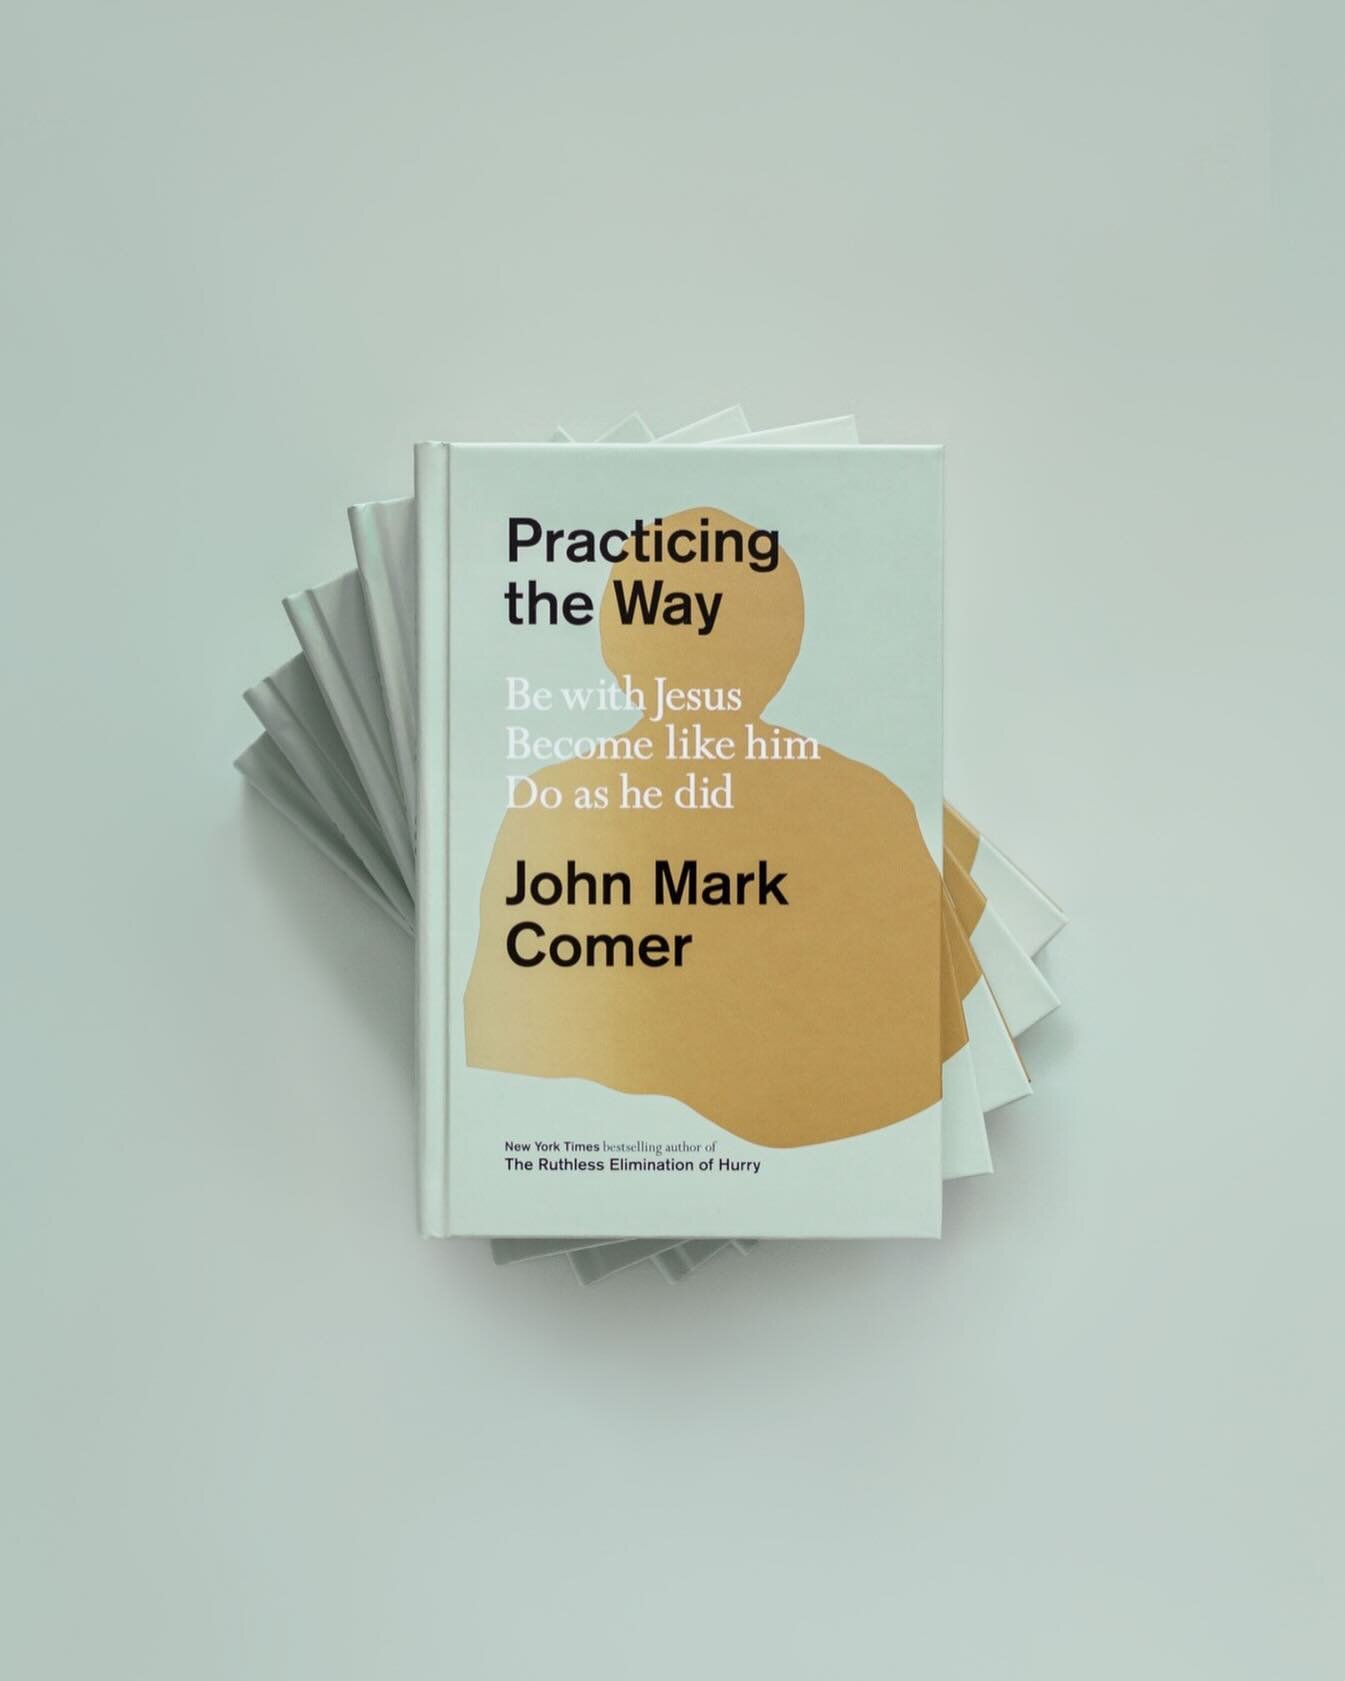 It&rsquo;s been a joy to my heart to see so many pastors use the new book for their churches. This is the first book I&rsquo;ve written that was specifically designed so churches could use it to bolster their work: for a teaching series on formation,